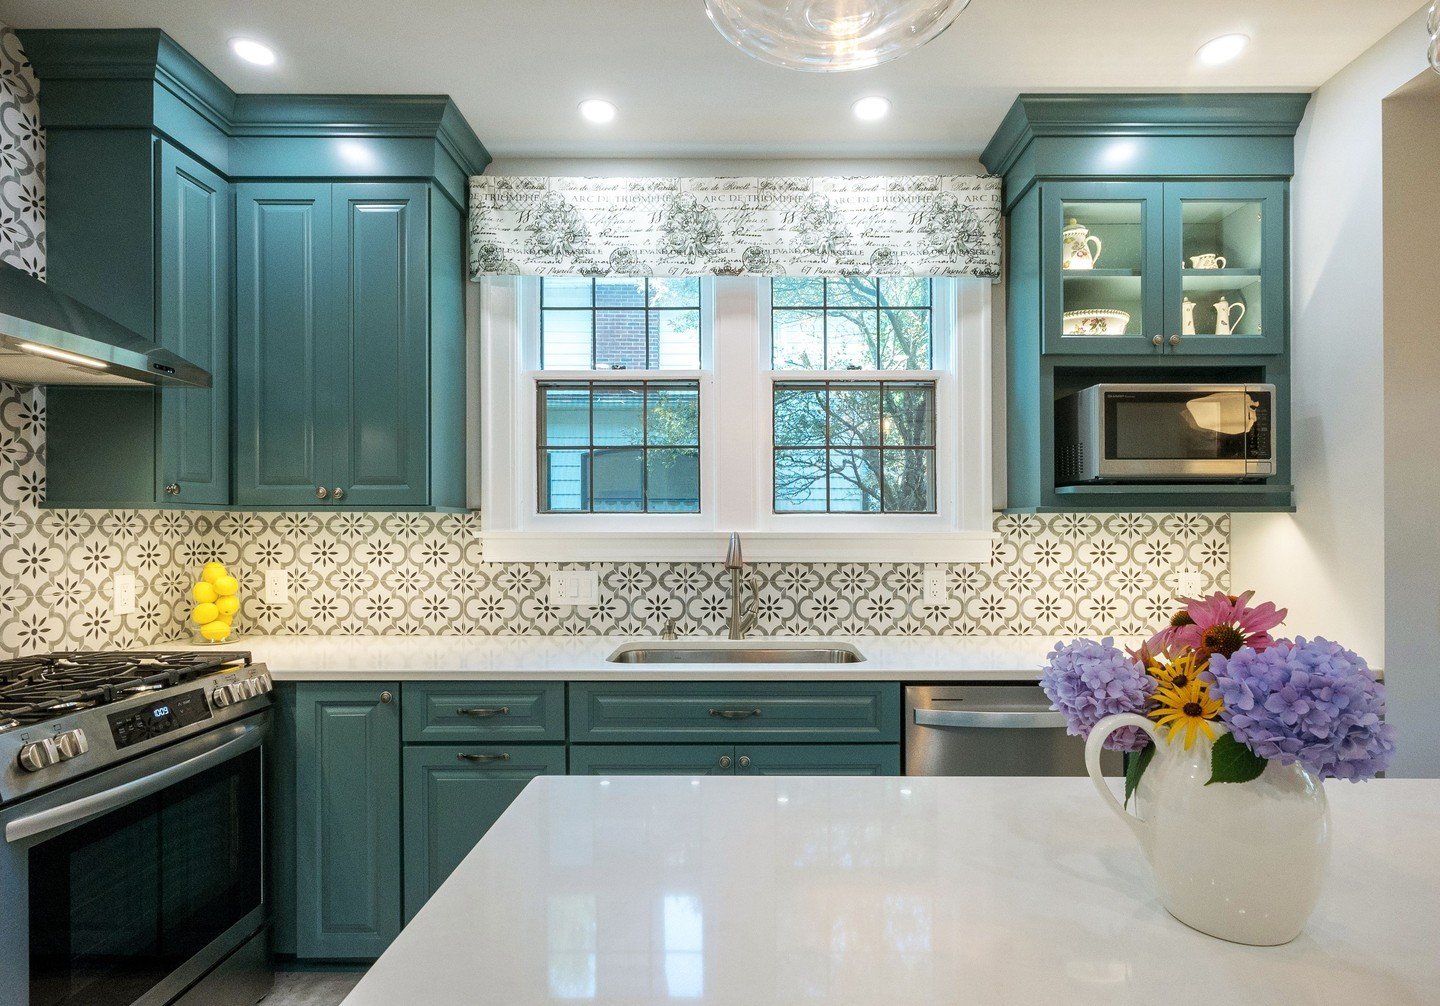 Step into this heartwarming kitchen! Classic meets modern in this renovated space filled with teal charm and natural light. Personalize it to make it truly yours. 🌺🍴 

#DreamKitchen #HomeReno #InteriorDesign #TealTales #KitchenGoals 
#rennovation #